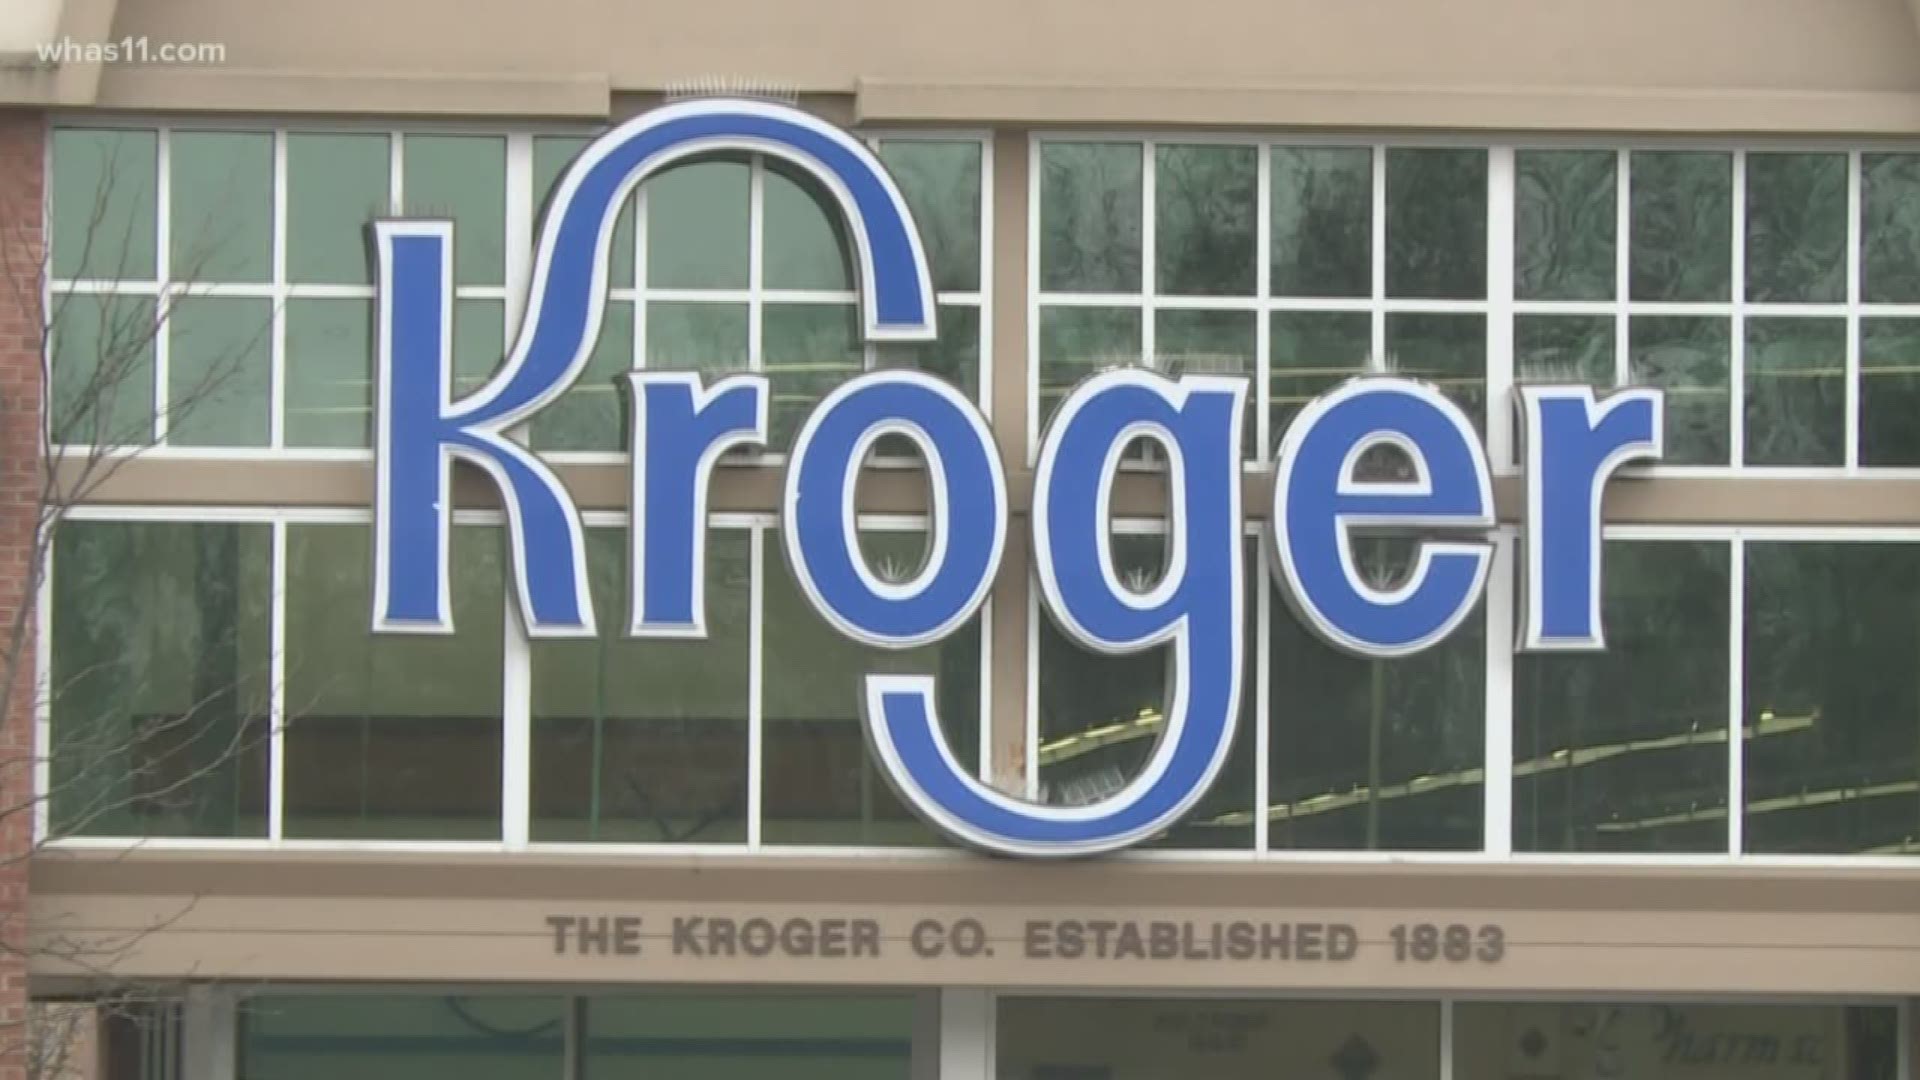 Kroger says the associate has not been at work for several days and crews have thoroughly deep cleaned and sanitized.